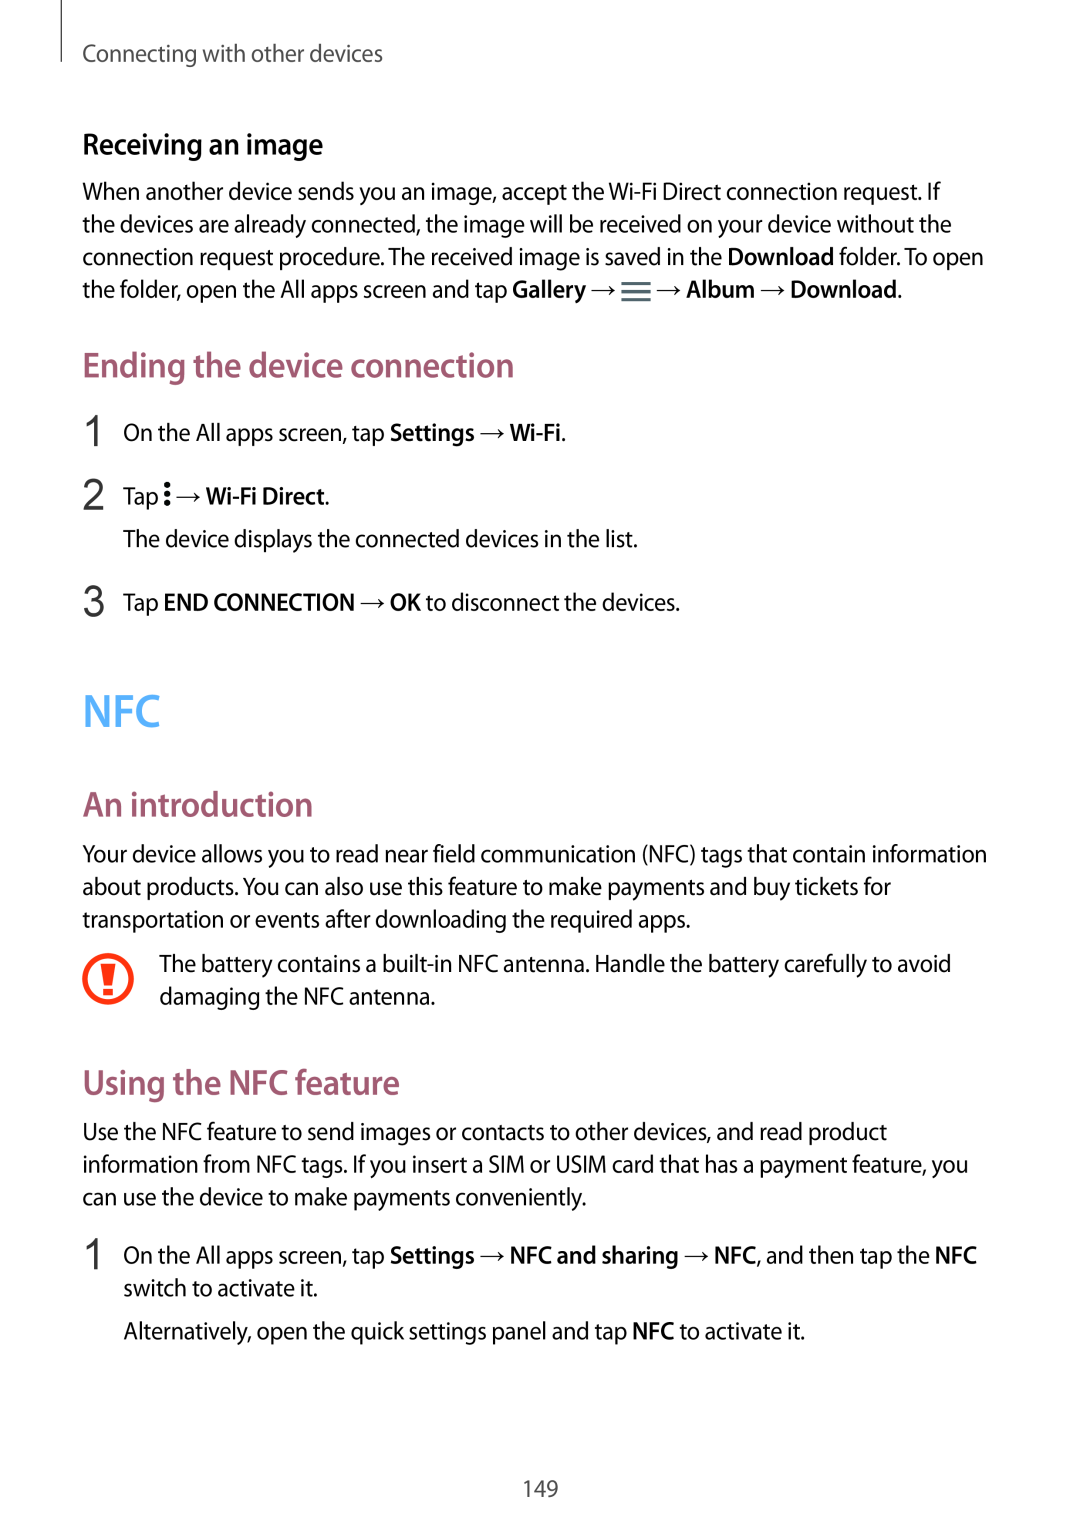 Samsung SM-N915FZKYXEH manual Ending the device connection, Using the NFC feature, An introduction, Receiving an image 